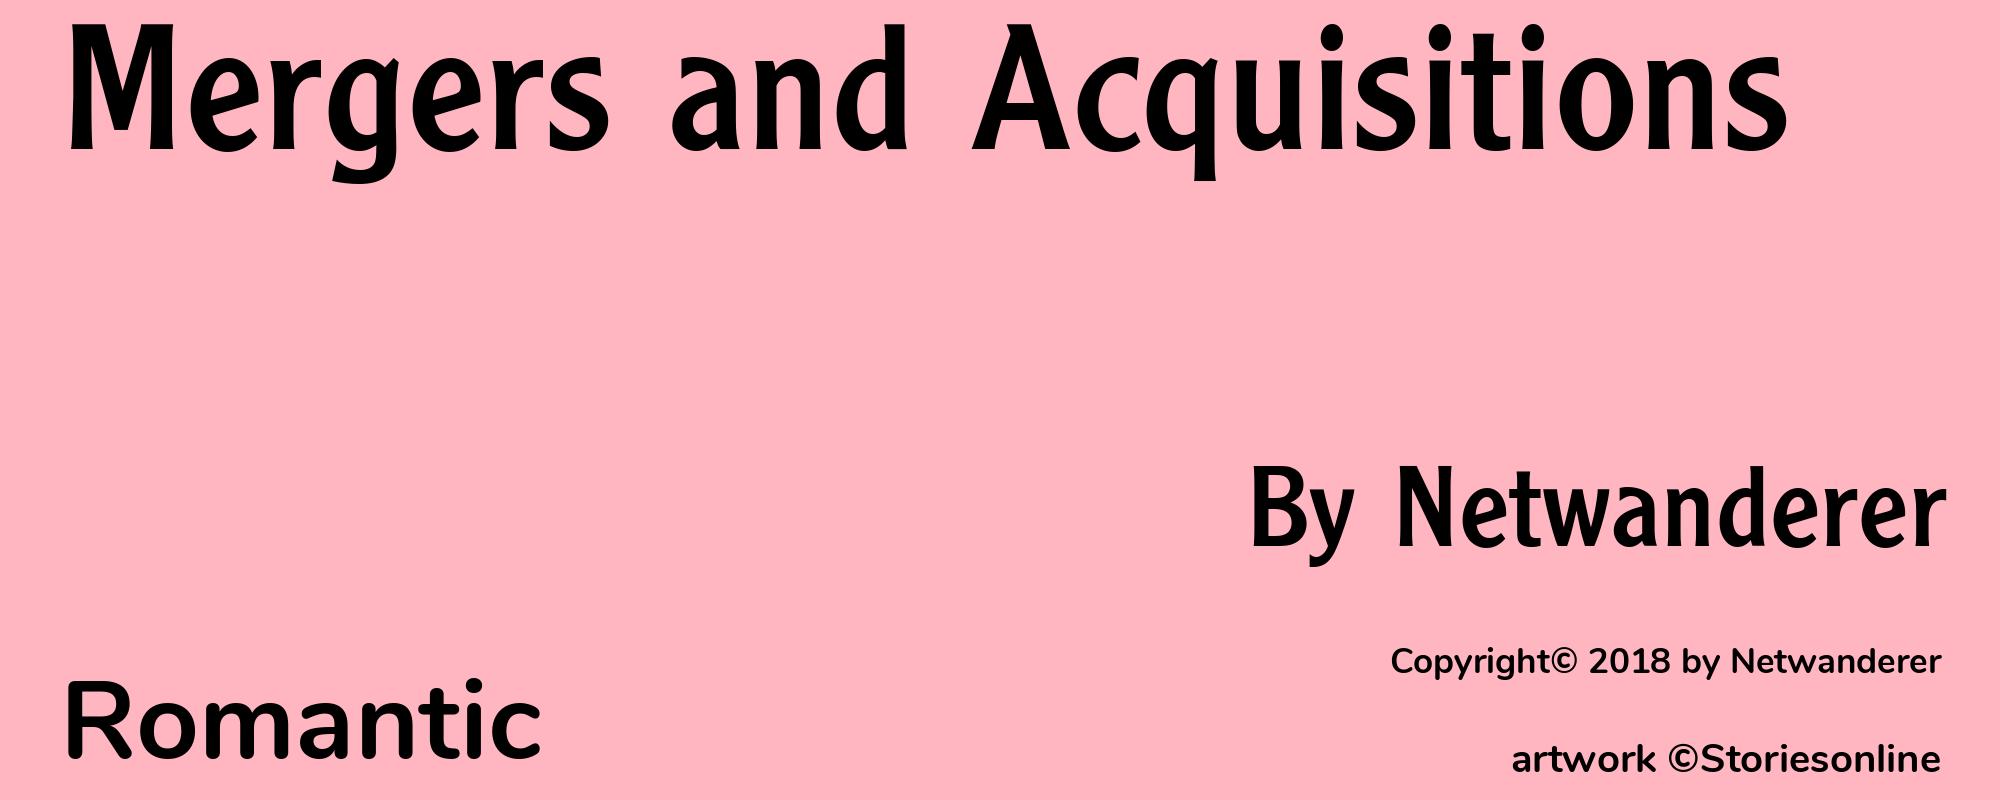 Mergers and Acquisitions - Cover